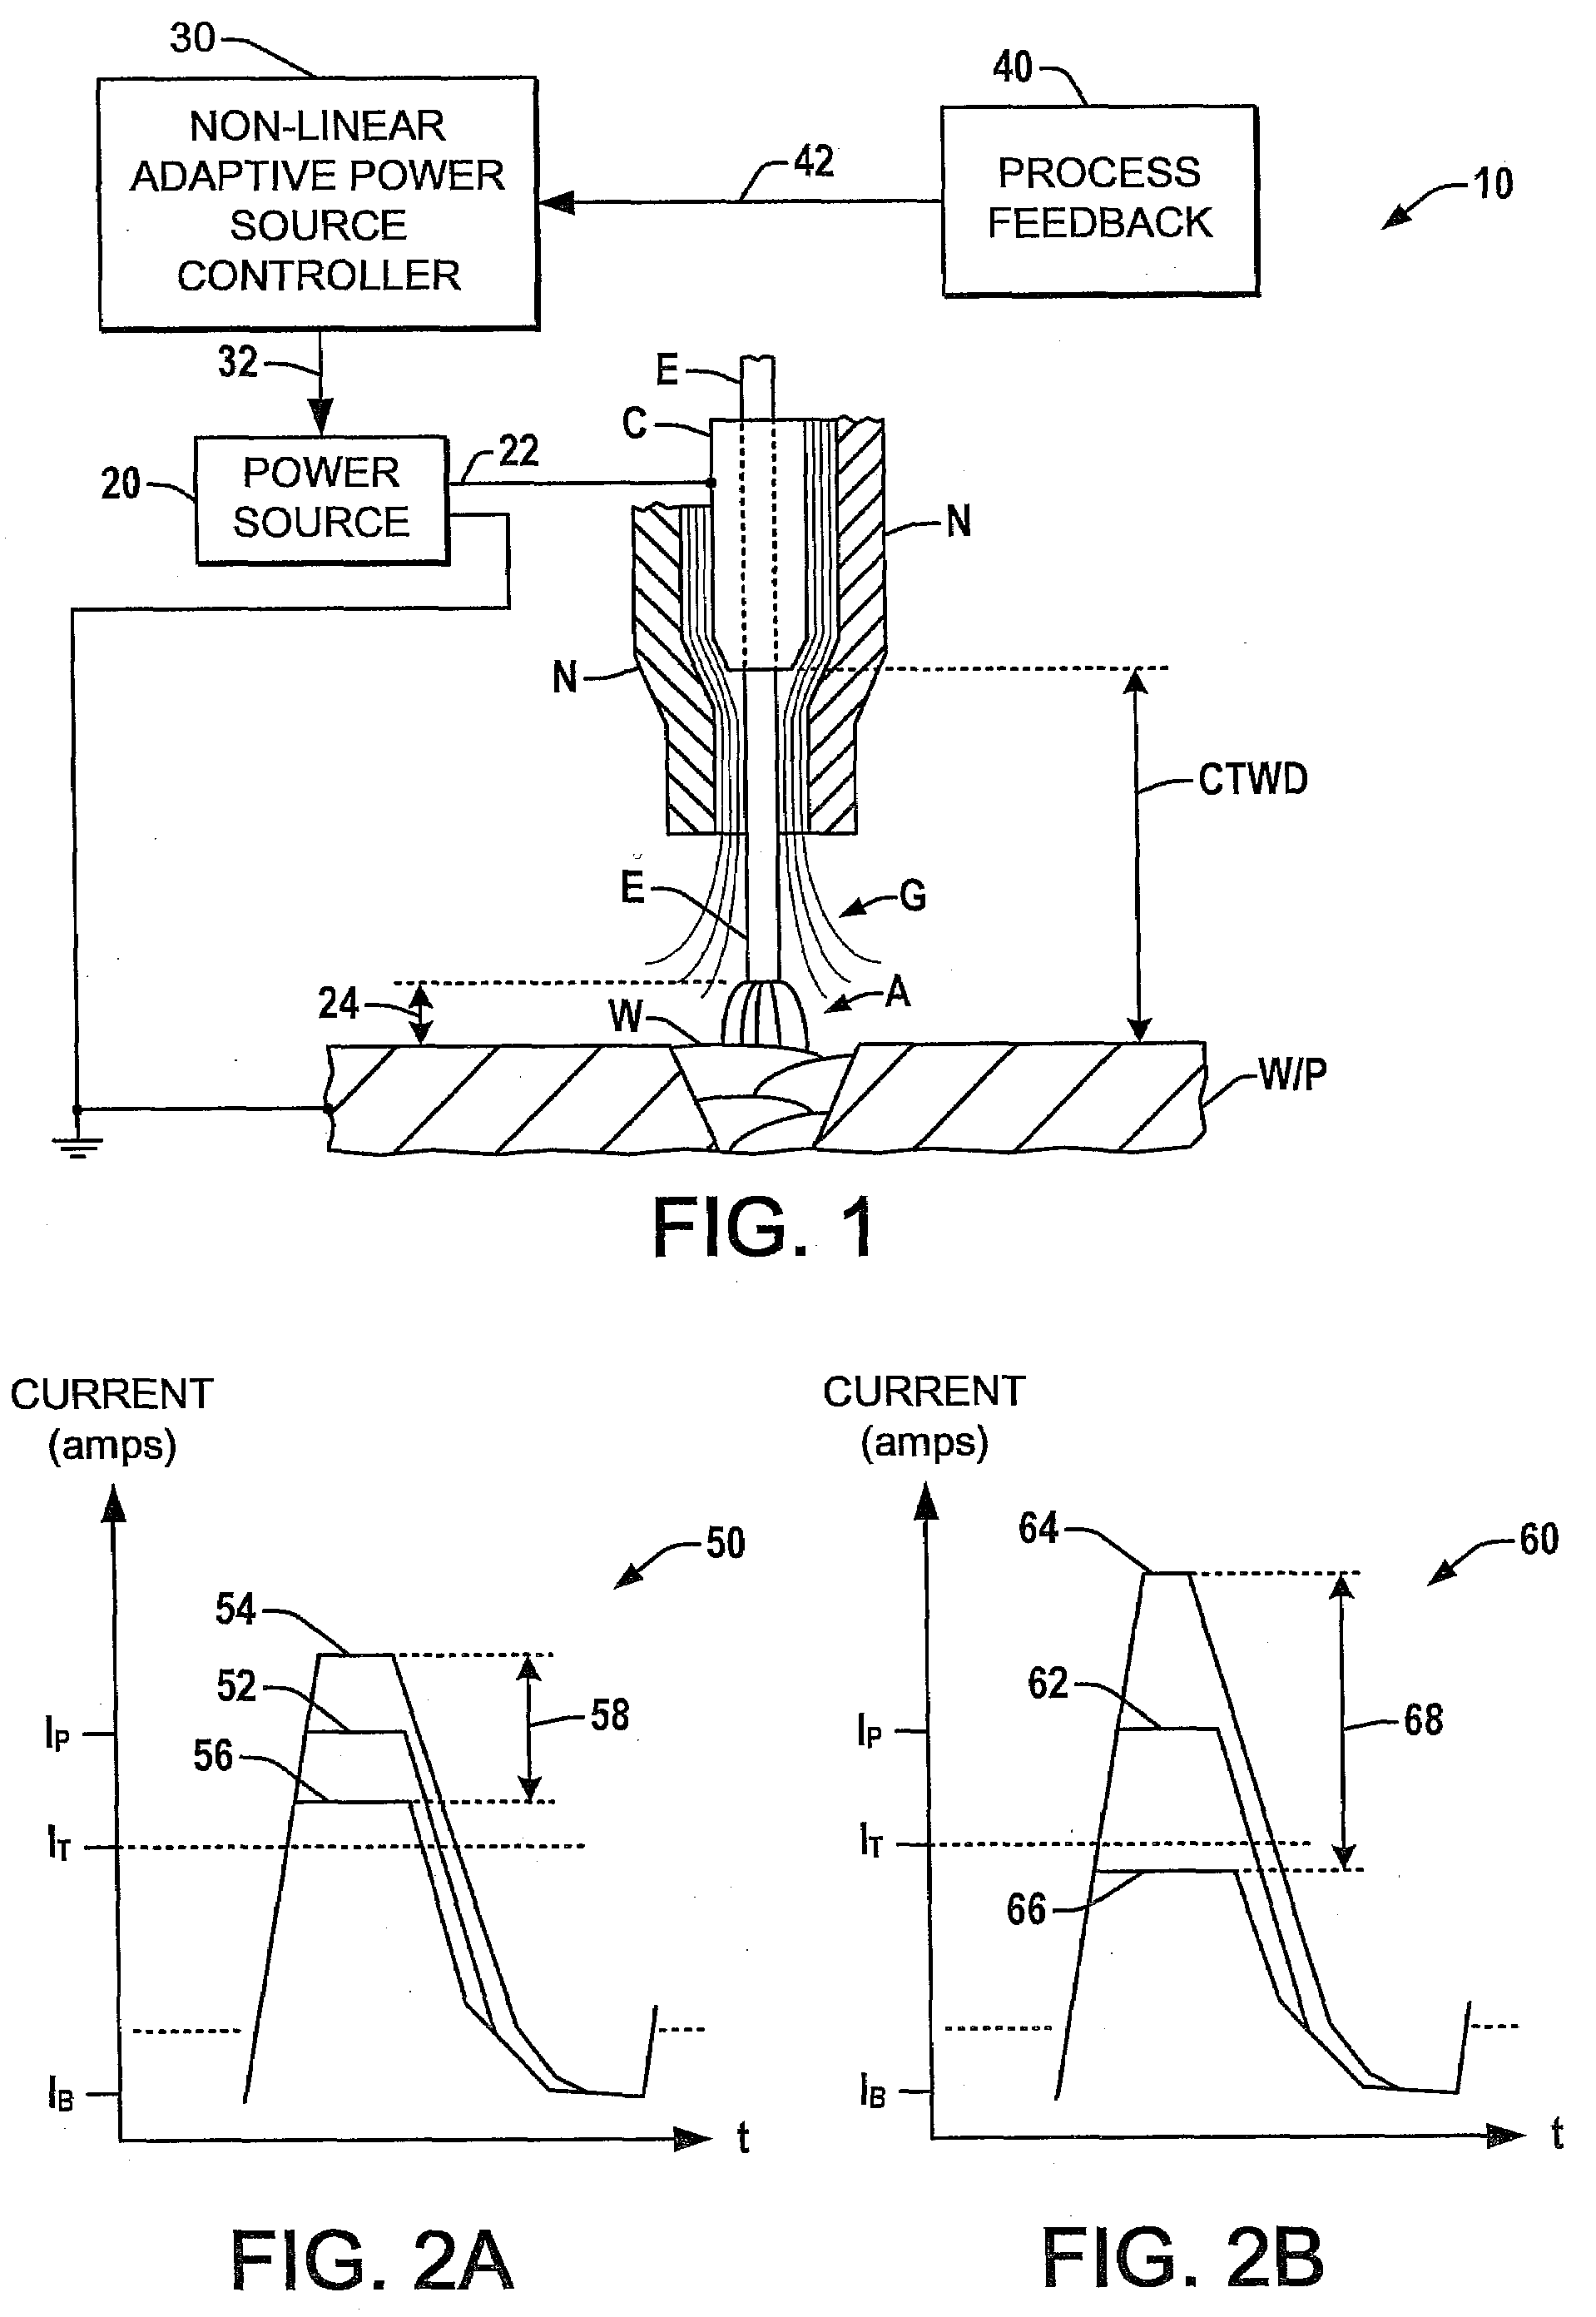 Non-linear adaptive control system and method for welding